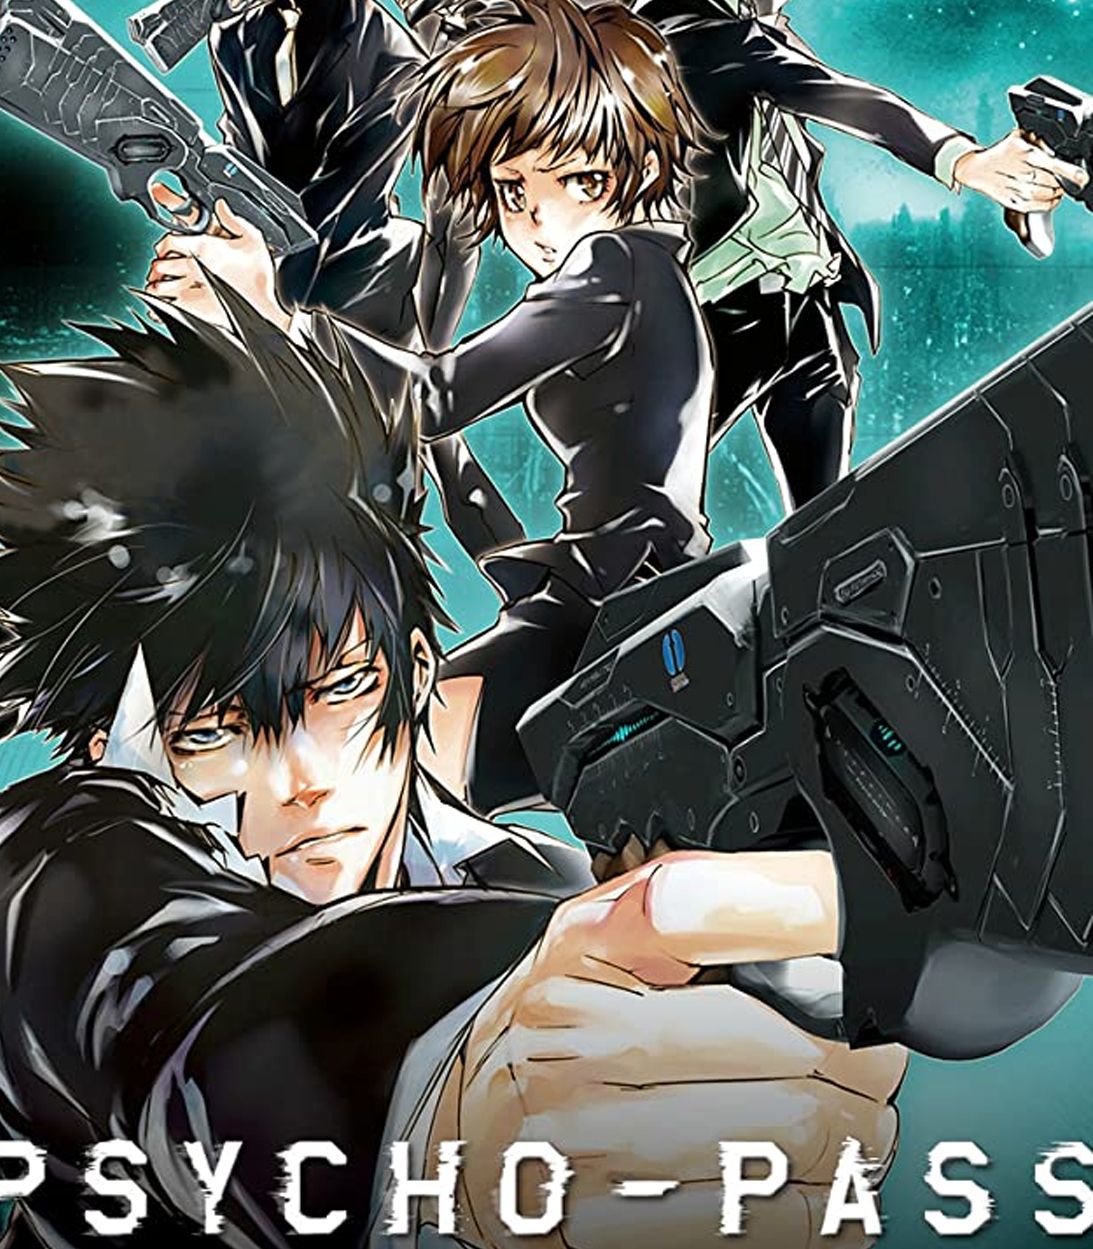 The cast on the Psycho-Pass Poster